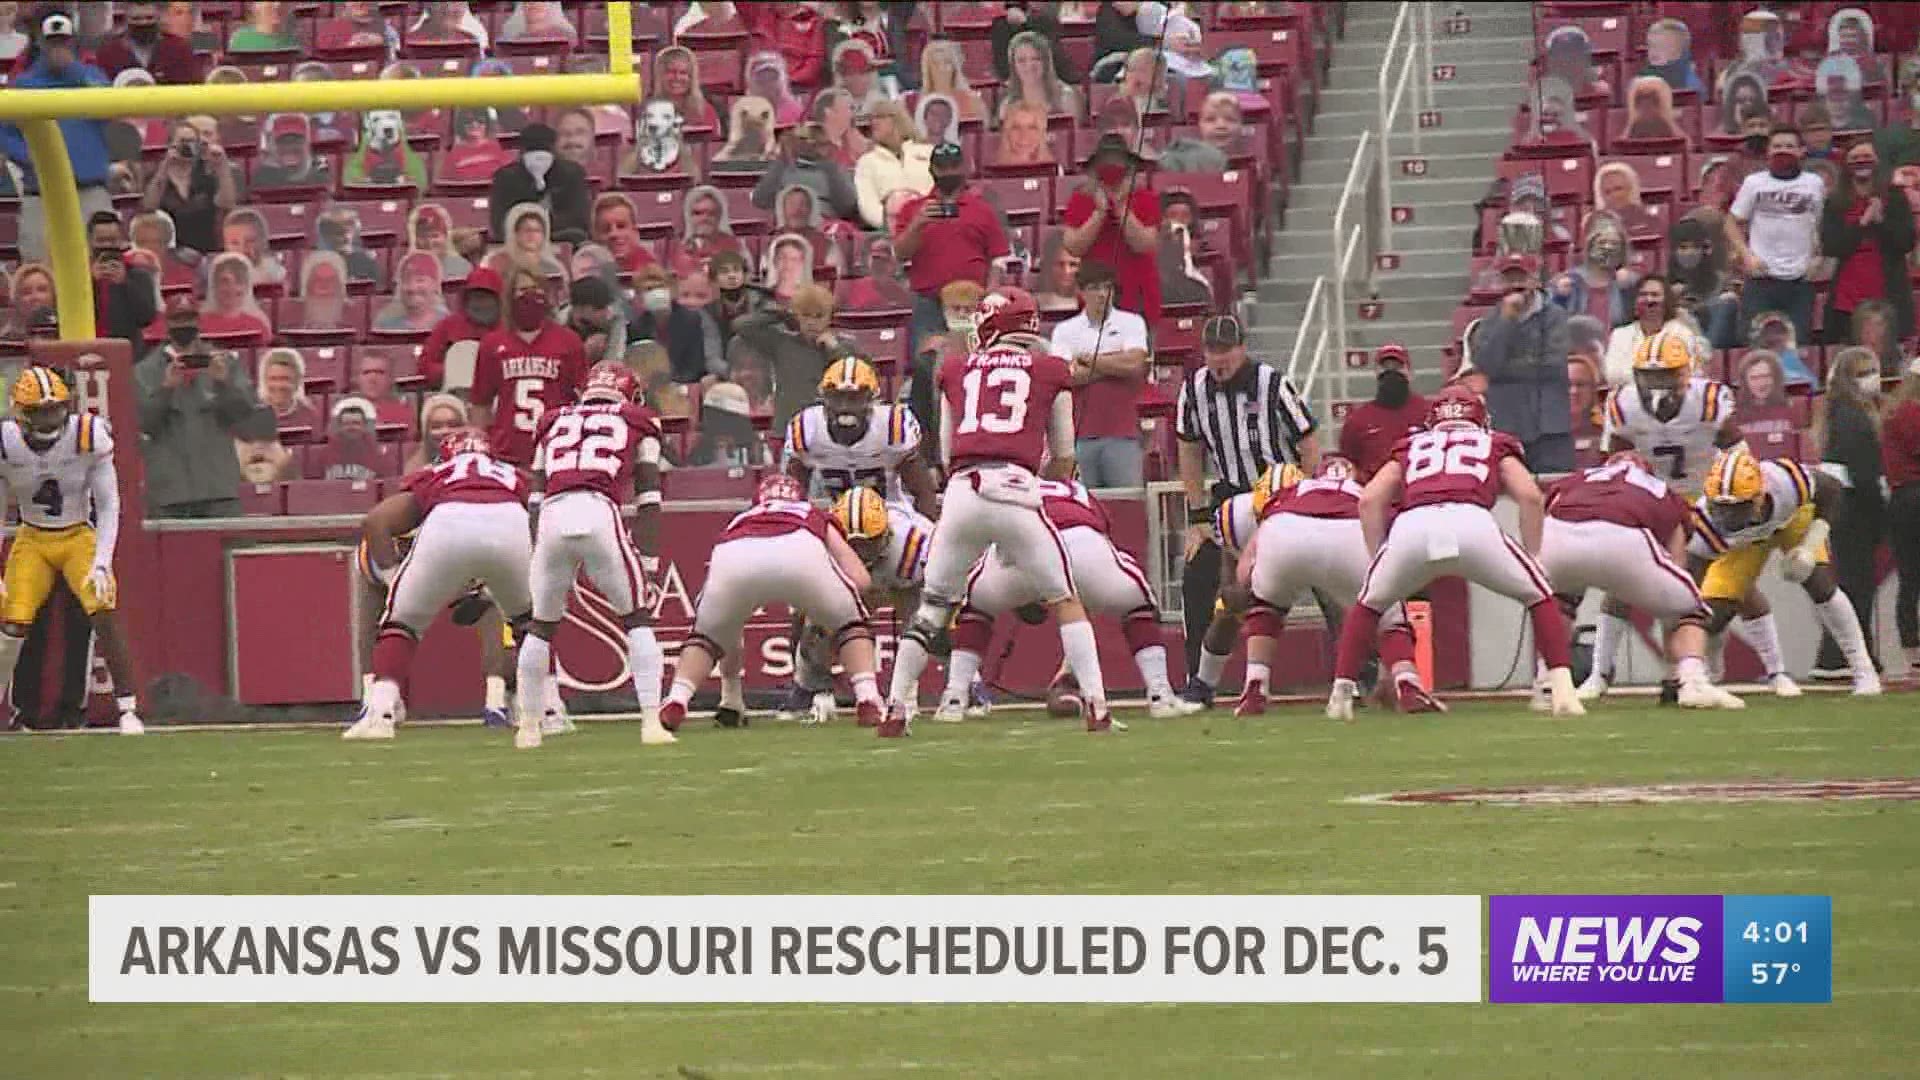 The game was initially rescheduled due to a COVID-19 outbreak within the Razorback football program, according to an SEC spokesperson.